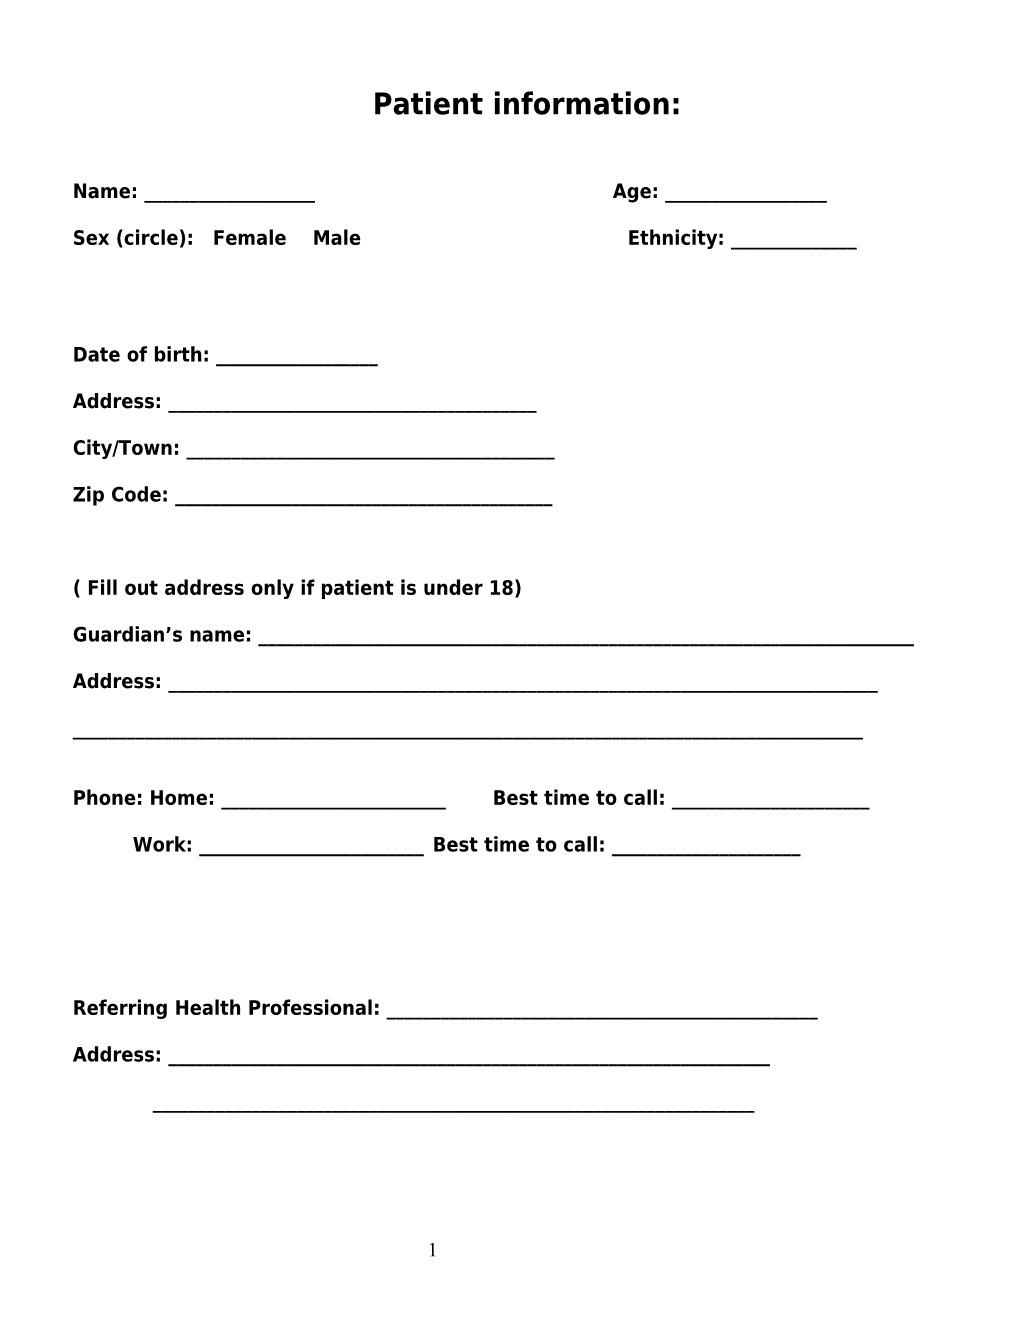 Young Patient Questionnaire for Bone Densitometry at the Yale Bone Center